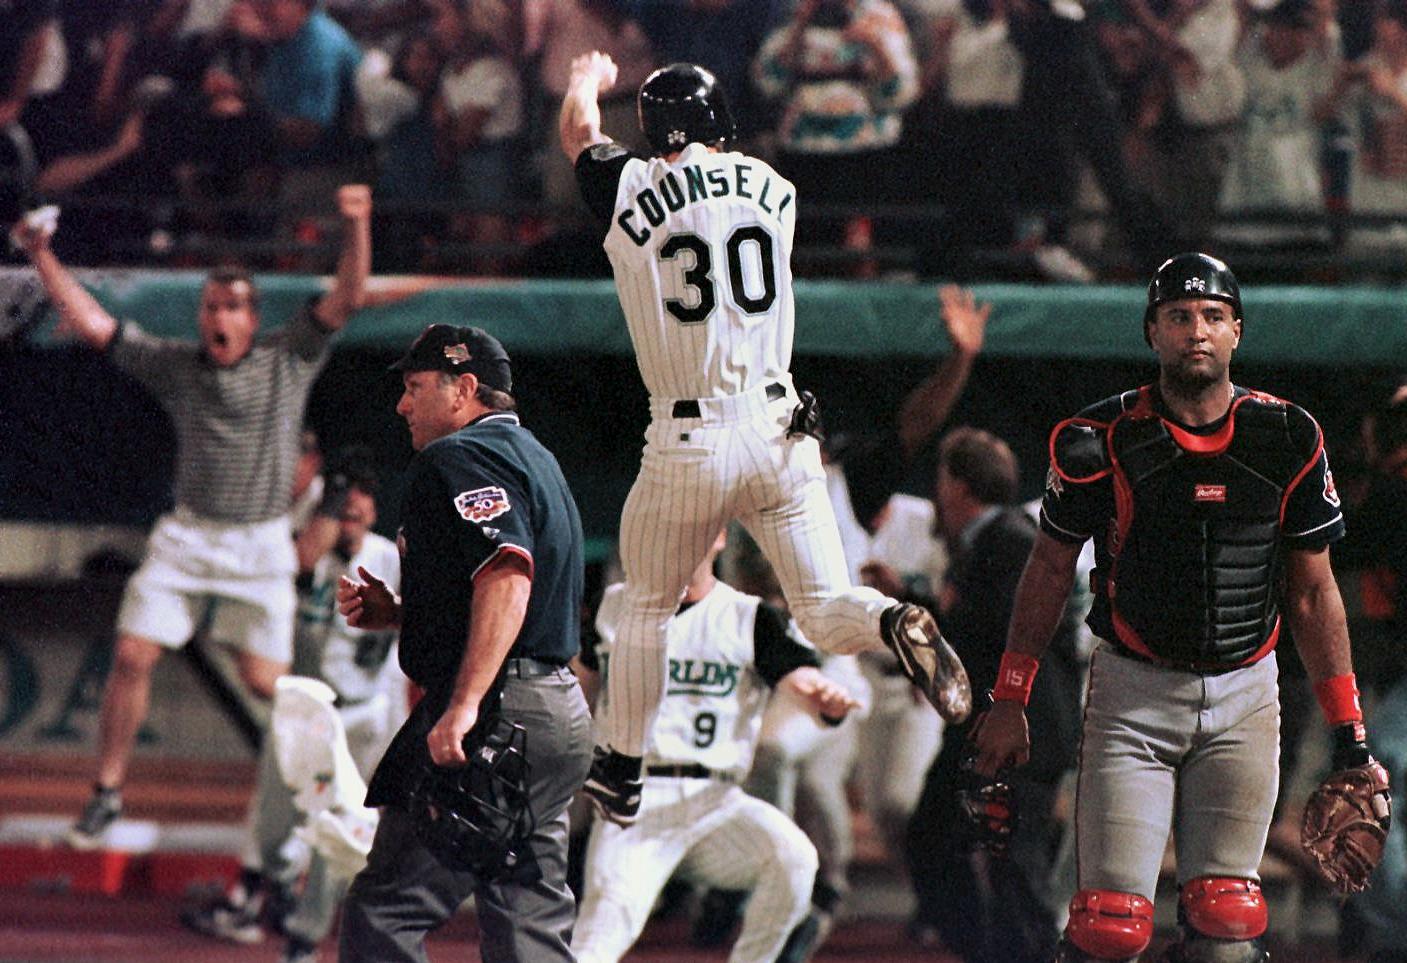 PHOTO: Florida Marlins player Craig Counsell jumps in the air after crossing the plate with the winning run as Cleveland Indians catcher Sandy Alomar walks off the field in game seven of the World Series, Oct. 26 1997, at Pro Player Stadium in Miami.   